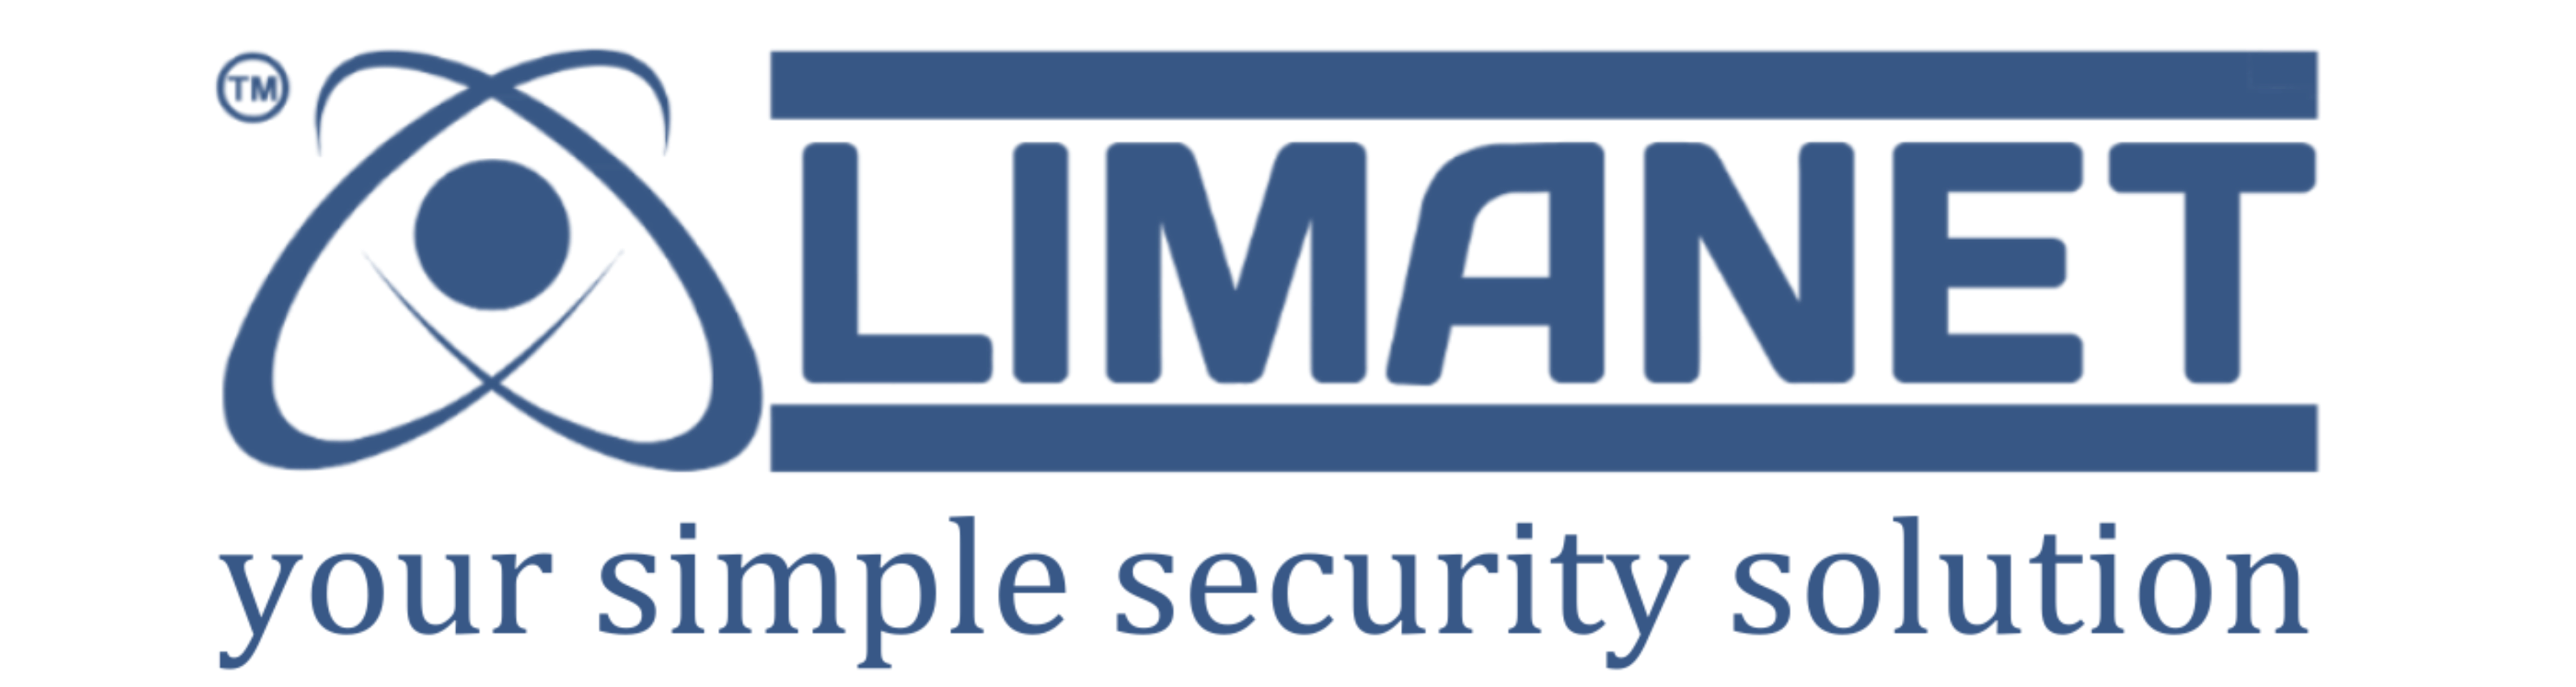 LIMANET — your simple security solution